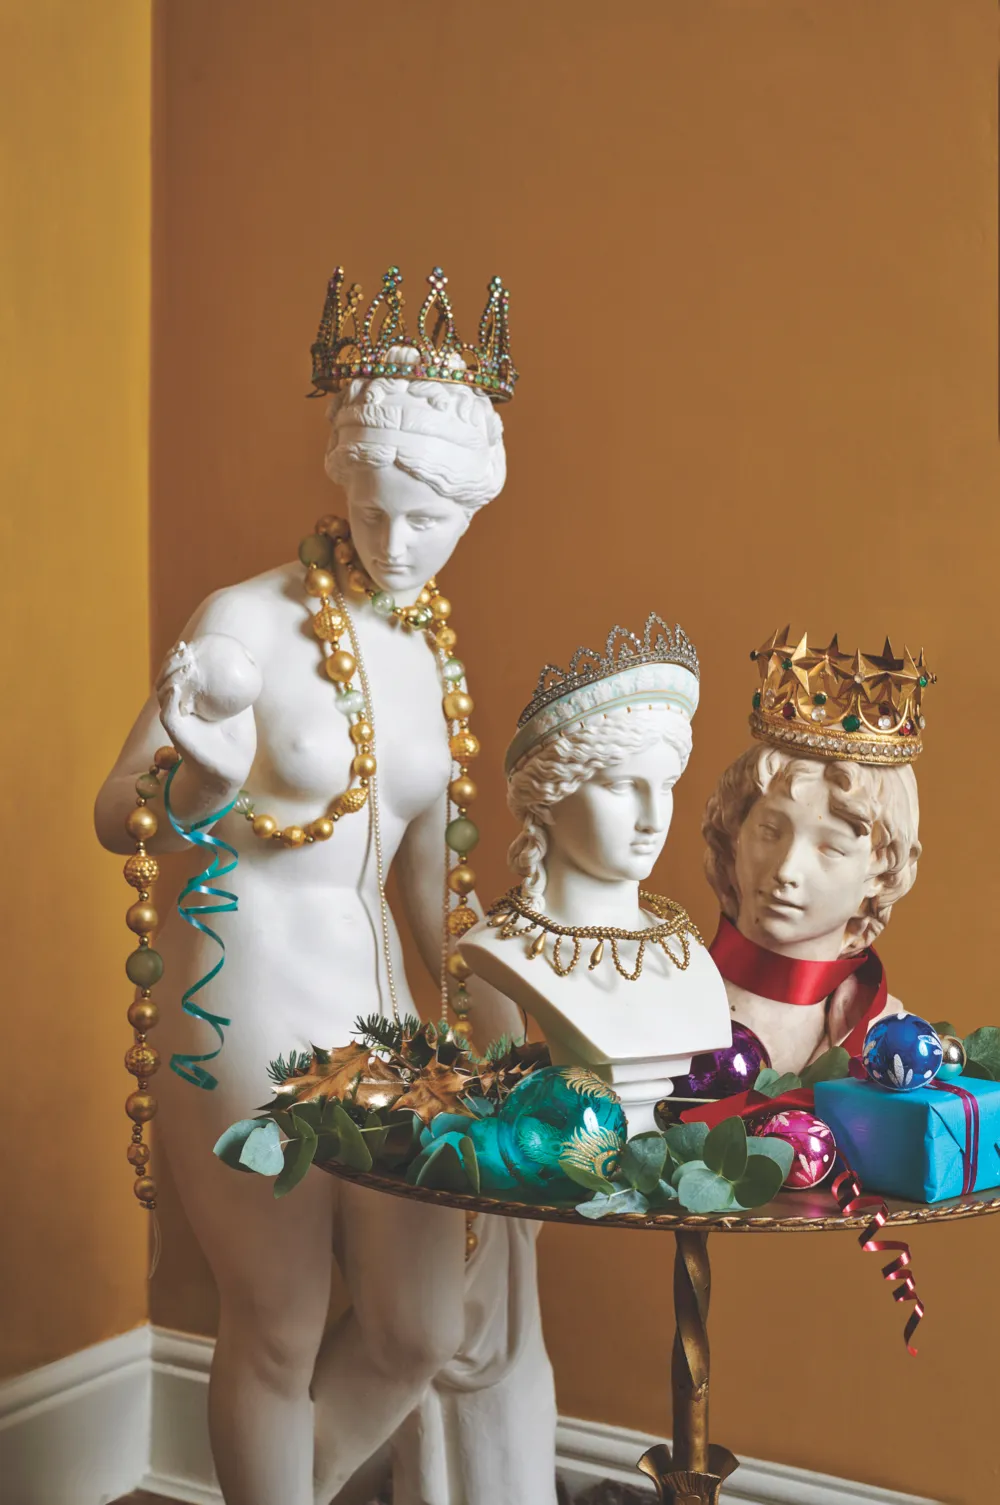 Antique busts decorated with tiaras, crowns and necklaces